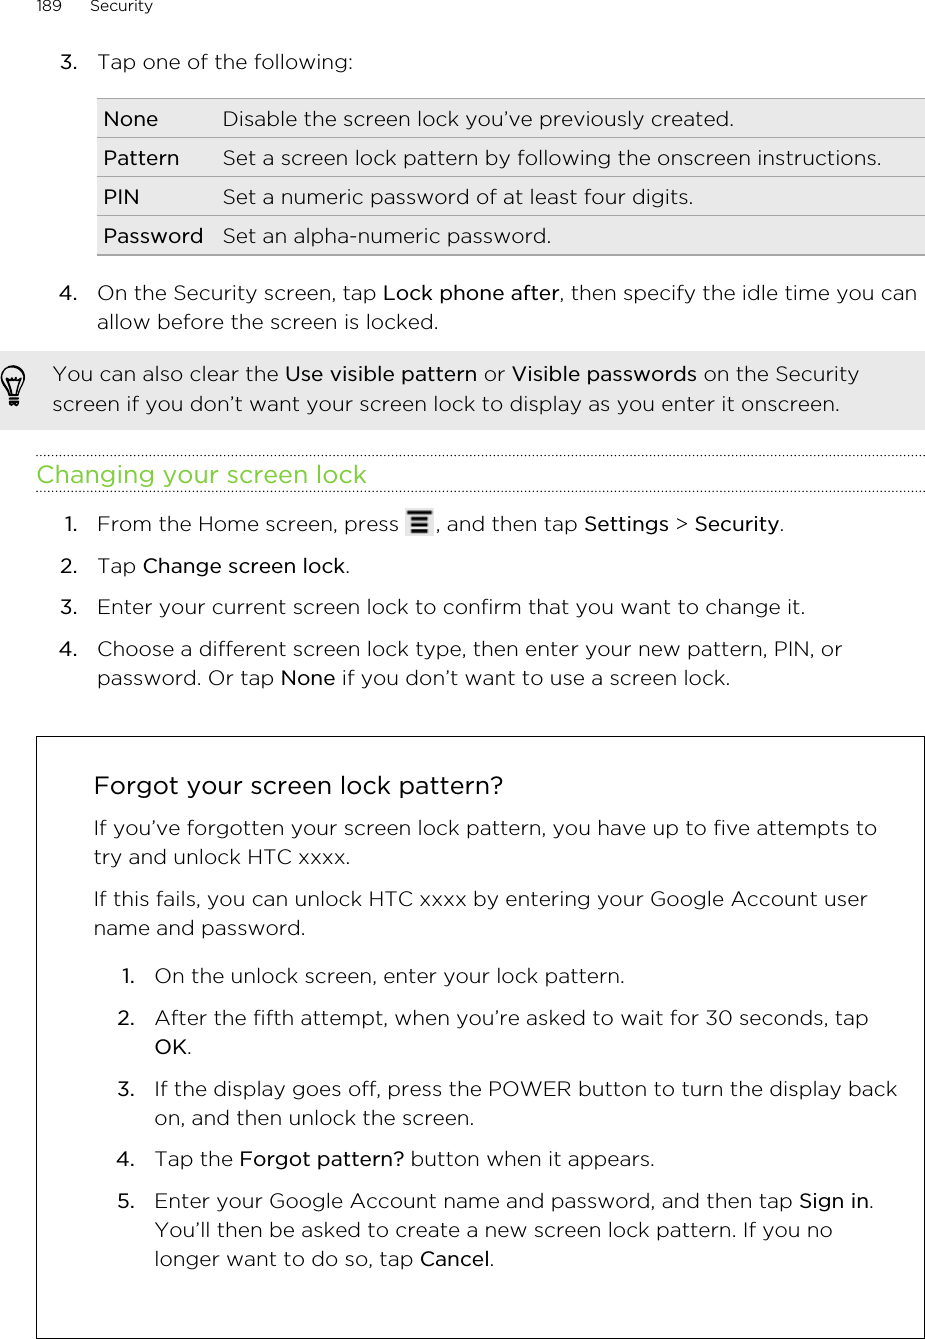 3. Tap one of the following:None Disable the screen lock you’ve previously created.Pattern Set a screen lock pattern by following the onscreen instructions.PIN Set a numeric password of at least four digits.Password Set an alpha-numeric password.4. On the Security screen, tap Lock phone after, then specify the idle time you canallow before the screen is locked. You can also clear the Use visible pattern or Visible passwords on the Securityscreen if you don’t want your screen lock to display as you enter it onscreen.Changing your screen lock1. From the Home screen, press  , and then tap Settings &gt; Security.2. Tap Change screen lock.3. Enter your current screen lock to confirm that you want to change it.4. Choose a different screen lock type, then enter your new pattern, PIN, orpassword. Or tap None if you don’t want to use a screen lock.Forgot your screen lock pattern?If you’ve forgotten your screen lock pattern, you have up to five attempts totry and unlock HTC xxxx.If this fails, you can unlock HTC xxxx by entering your Google Account username and password.1. On the unlock screen, enter your lock pattern.2. After the fifth attempt, when you’re asked to wait for 30 seconds, tapOK.3. If the display goes off, press the POWER button to turn the display backon, and then unlock the screen.4. Tap the Forgot pattern? button when it appears.5. Enter your Google Account name and password, and then tap Sign in.You’ll then be asked to create a new screen lock pattern. If you nolonger want to do so, tap Cancel.189 Security